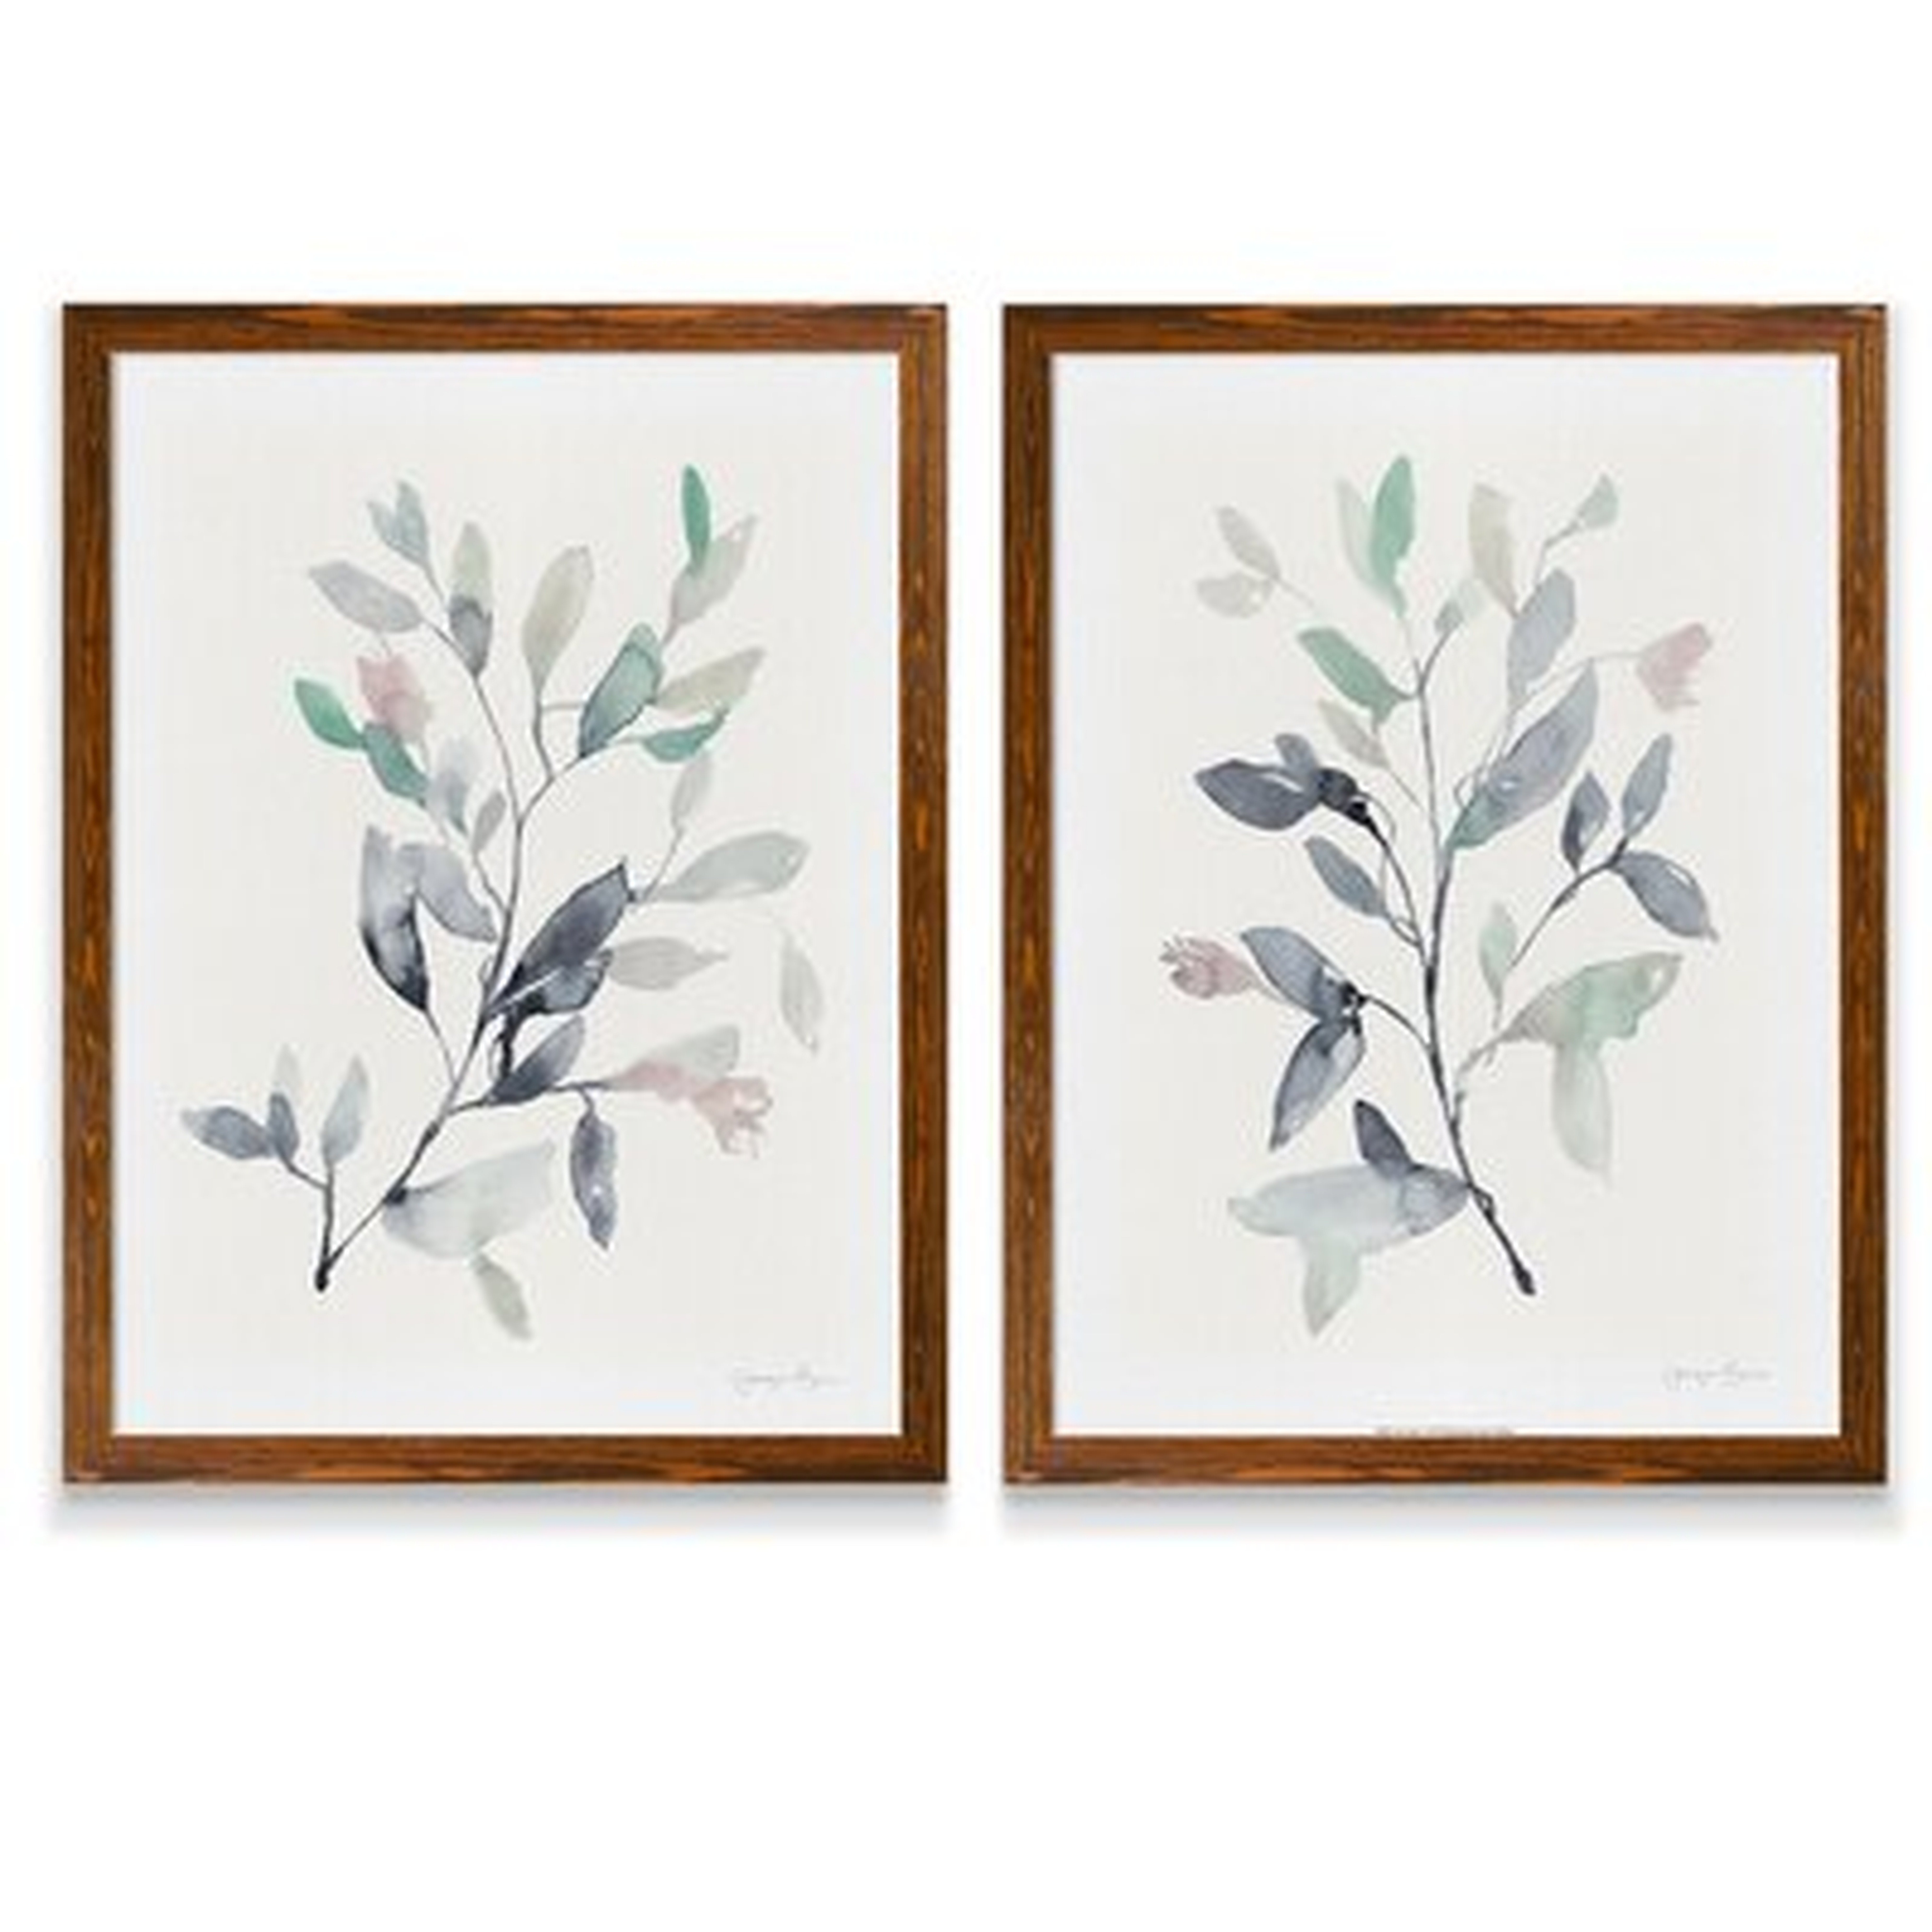 'Water Branches I' by Vincent Van Gogh - 2 Piece Picture Frame Painting Print Set - Wayfair